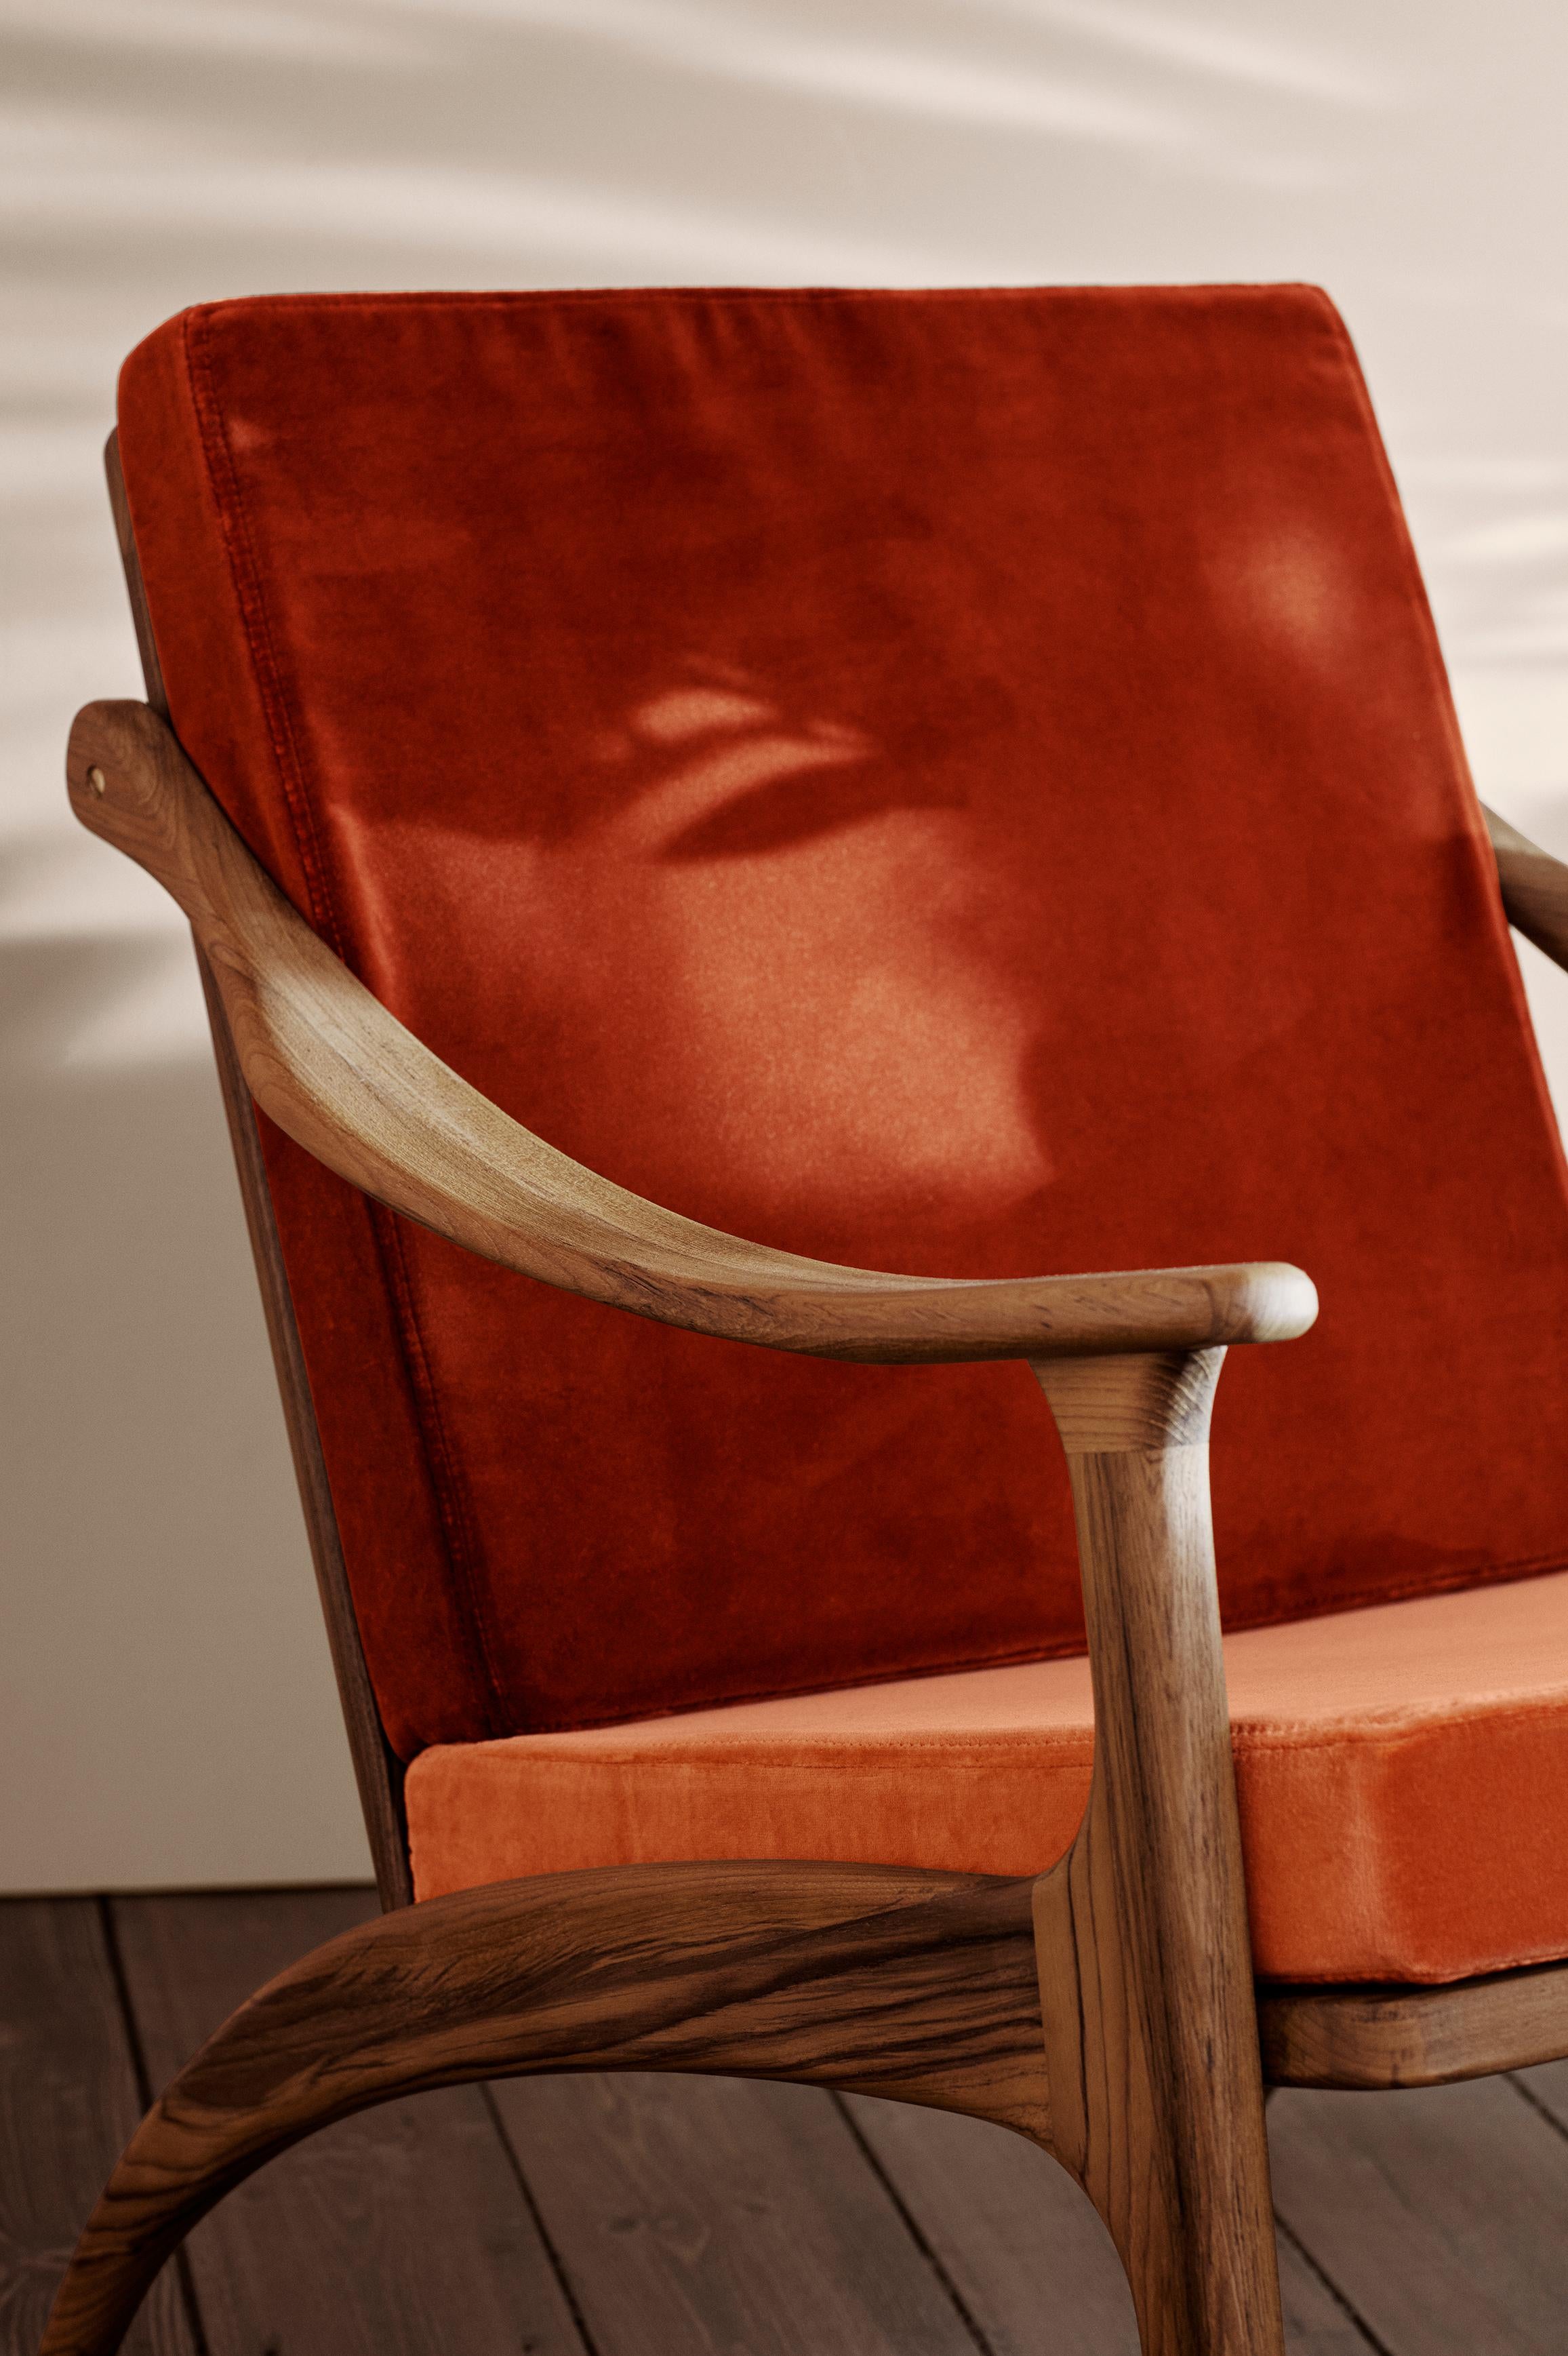 Lean Back Lounge Two-Tone Chair in Teak, by Arne Hovmand-Olsen from Warm Nordic For Sale 1